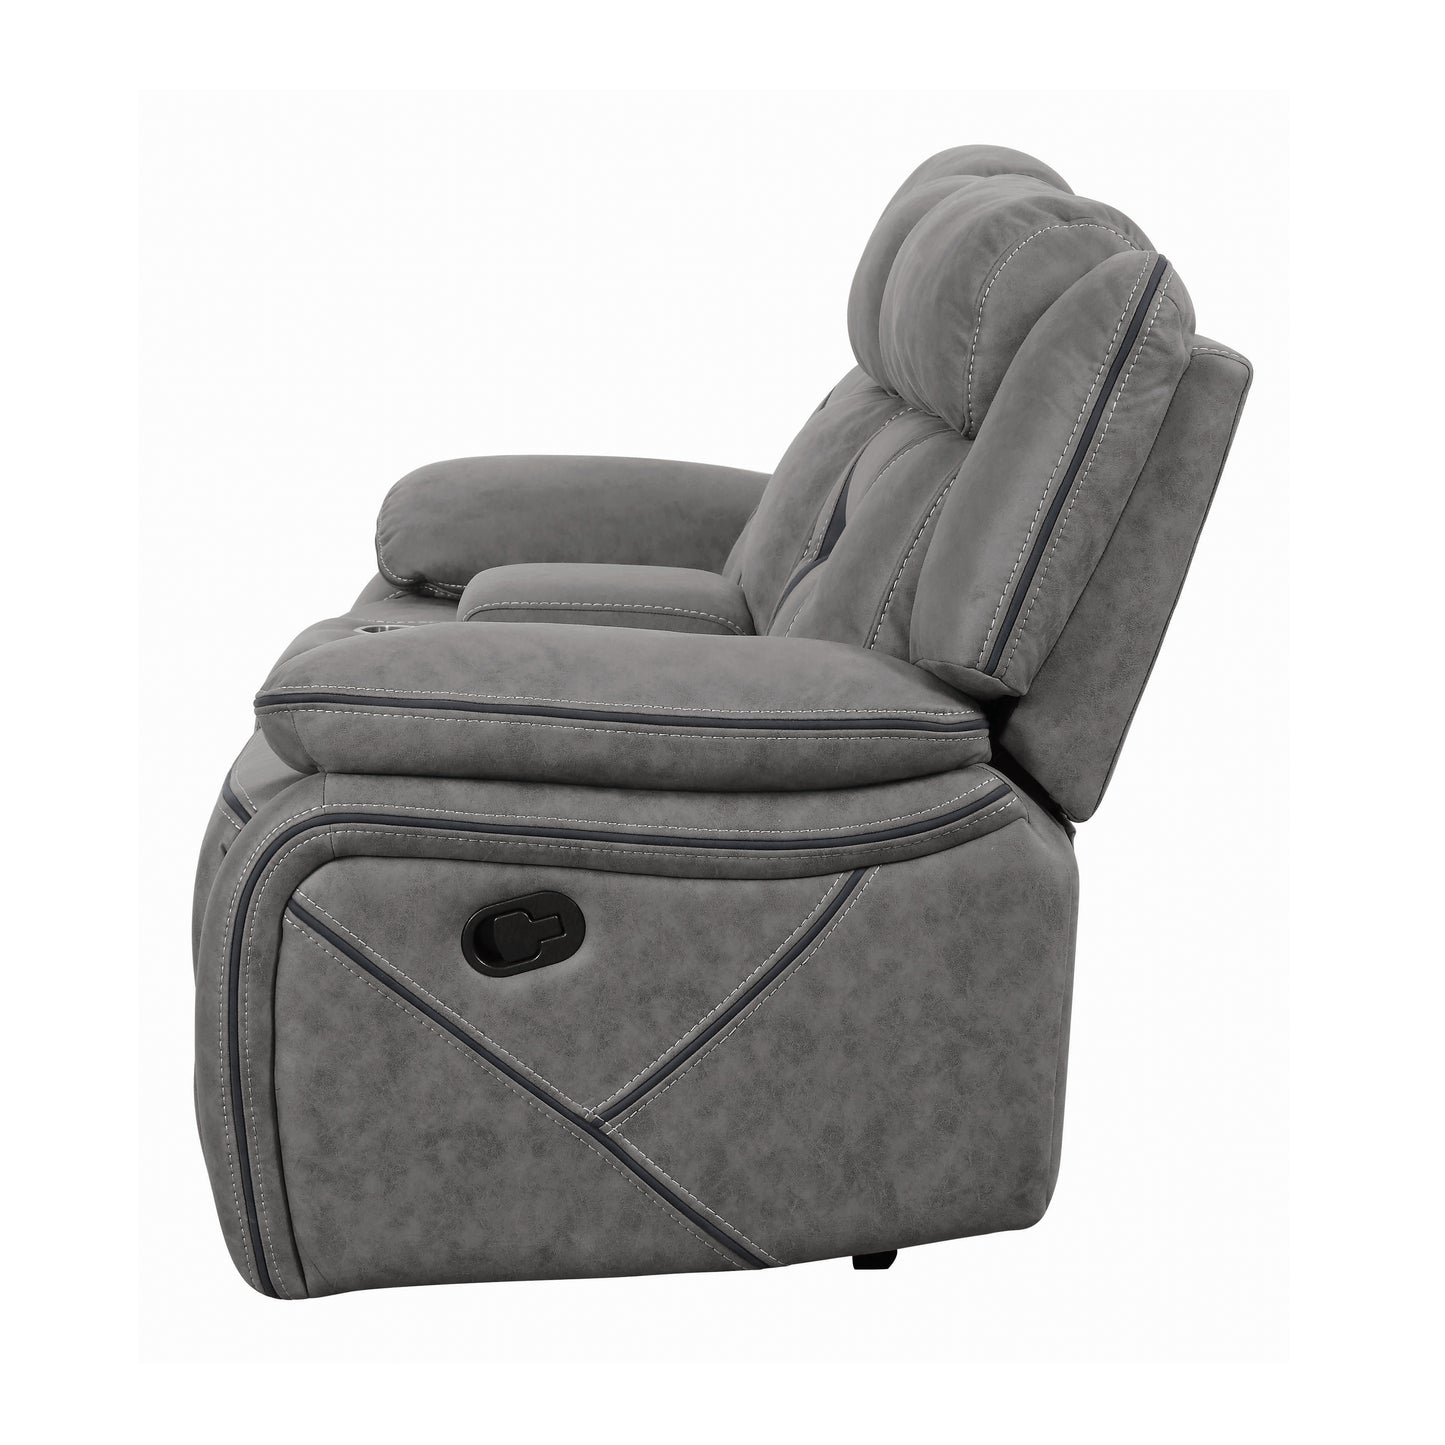 Higgins Pillow Top Arm Motion Loveseat with Console Grey